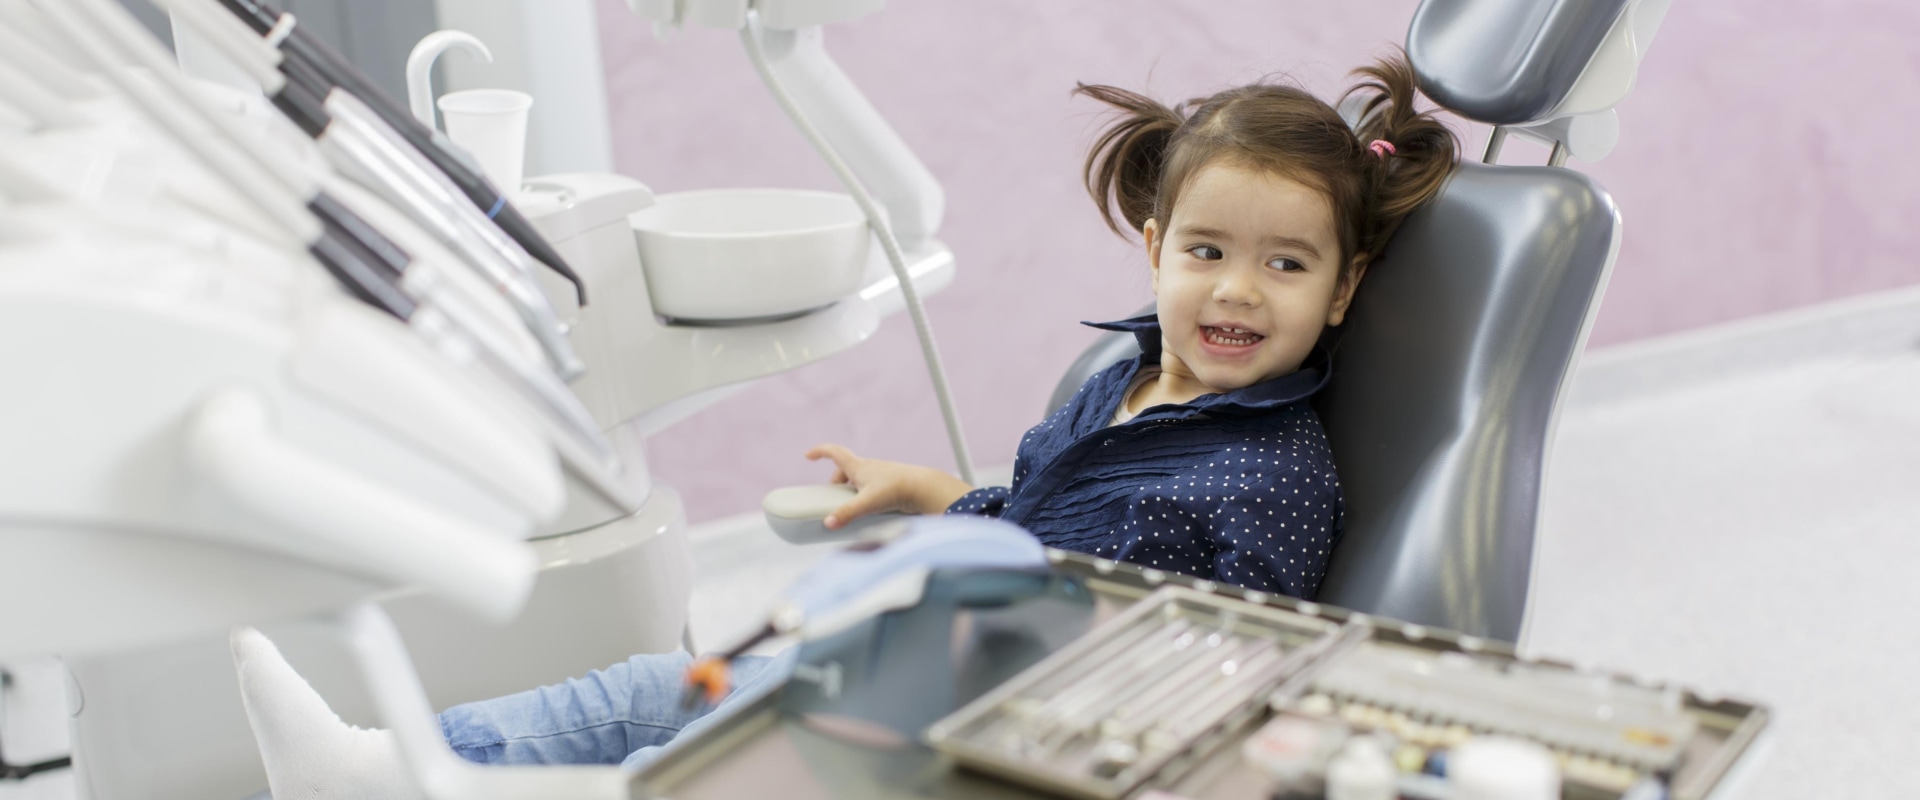 What to Expect During Your Child's First Dental Visit?